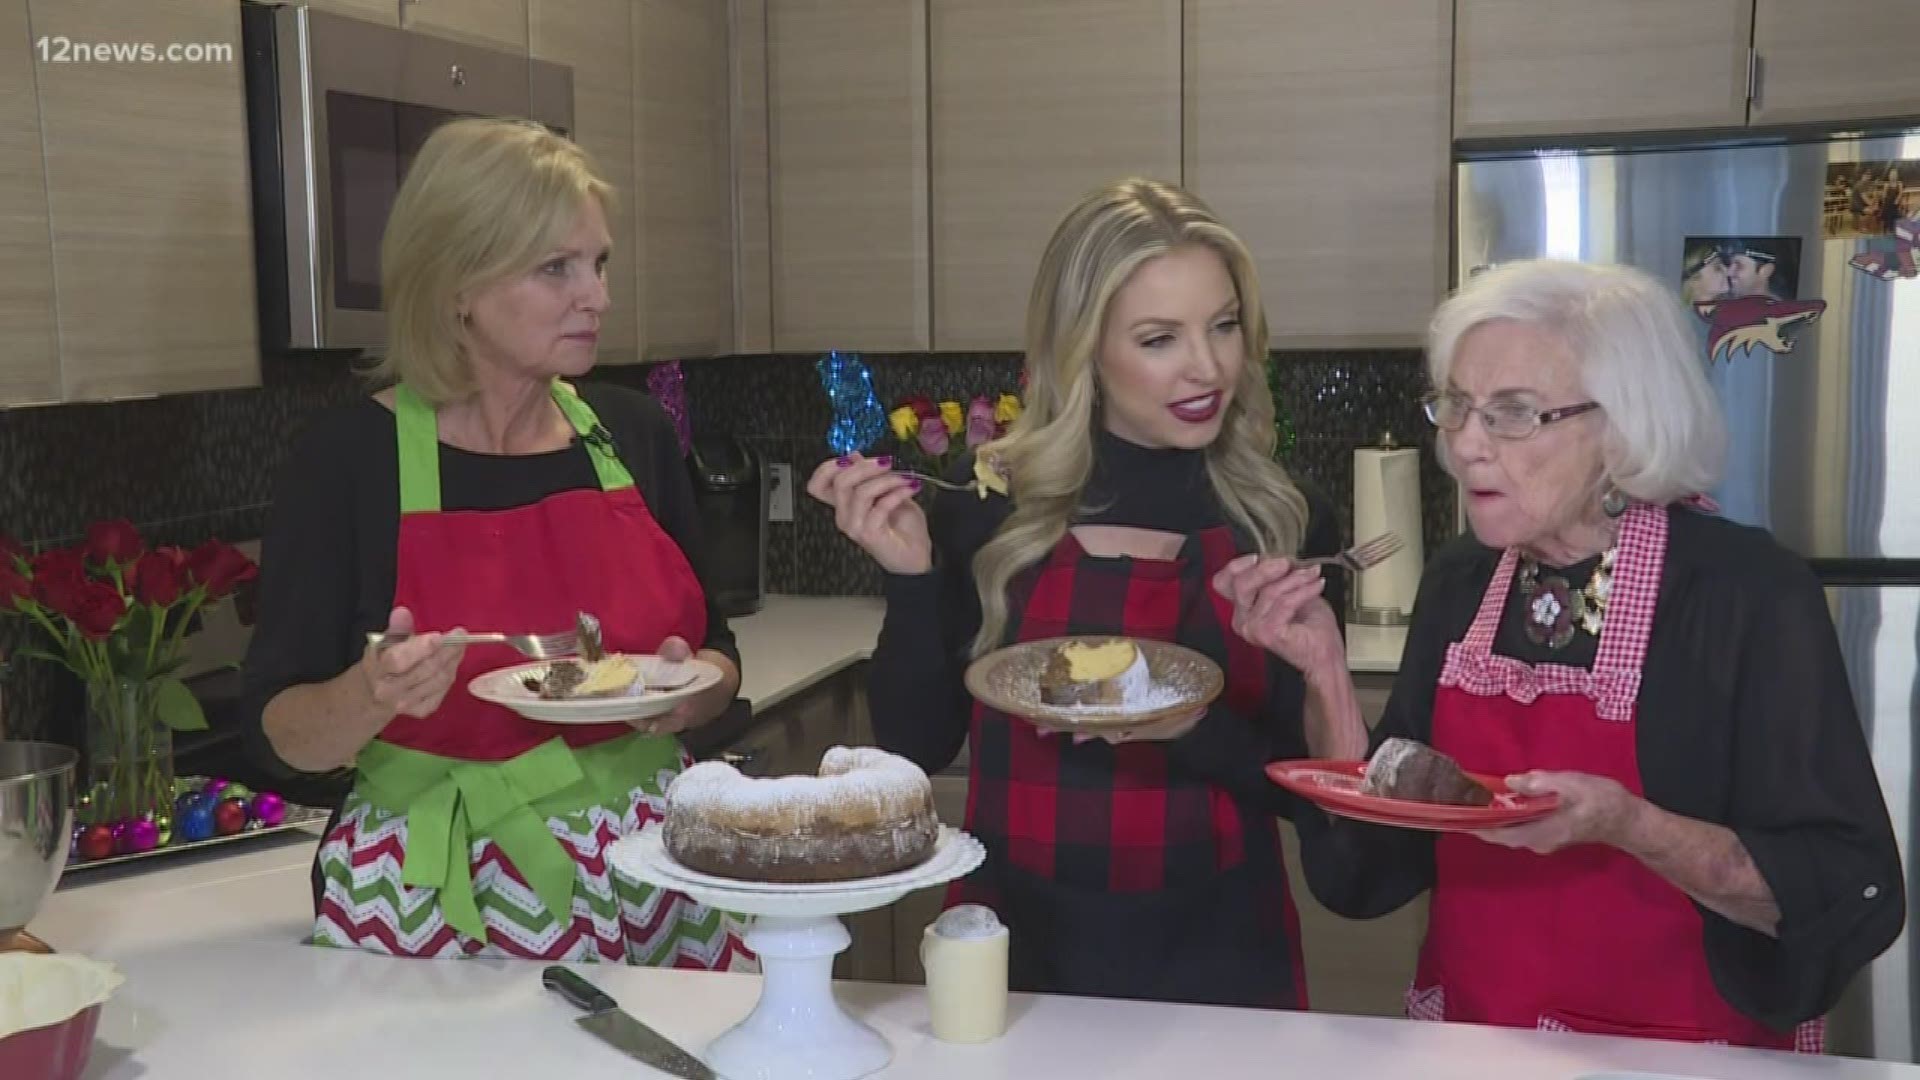 With this 12 News holiday recipe, Team 12's Kristen Keogh brings you into her family's kitchen to share a recipe for chocolate butterscotch cake